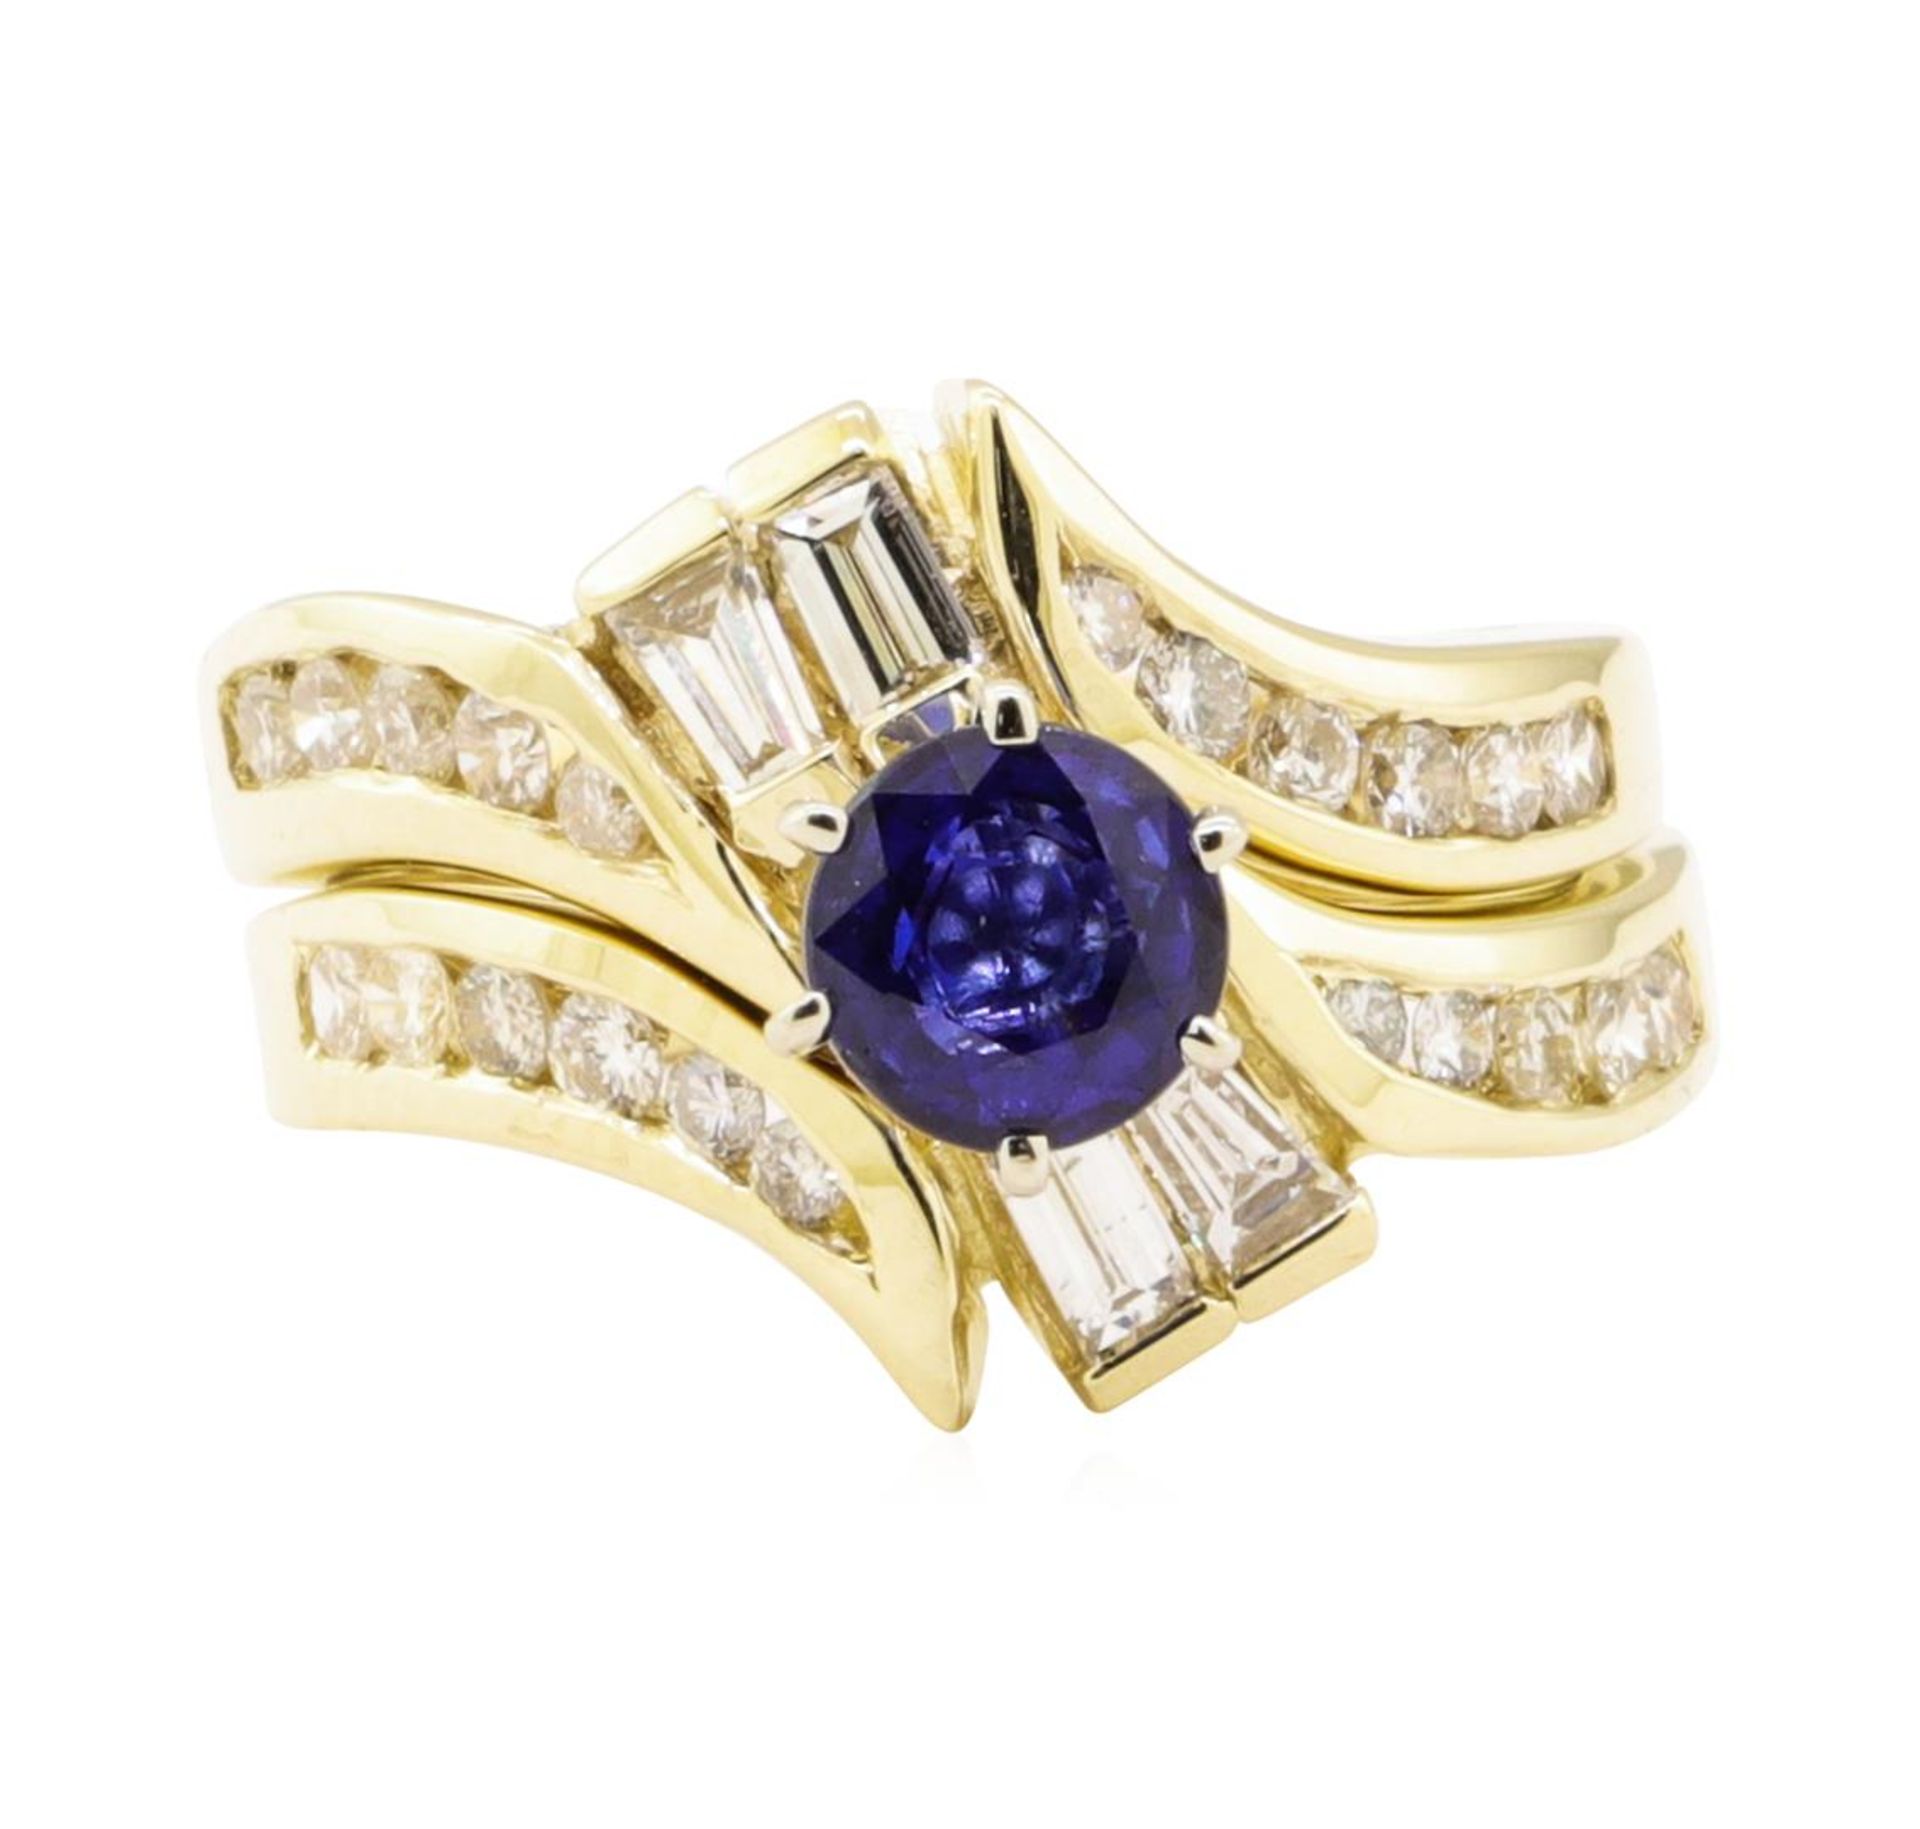 1.61 ctw Blue Sapphire And Diamond Ring And Band - 14KT Yellow Gold - Image 2 of 4